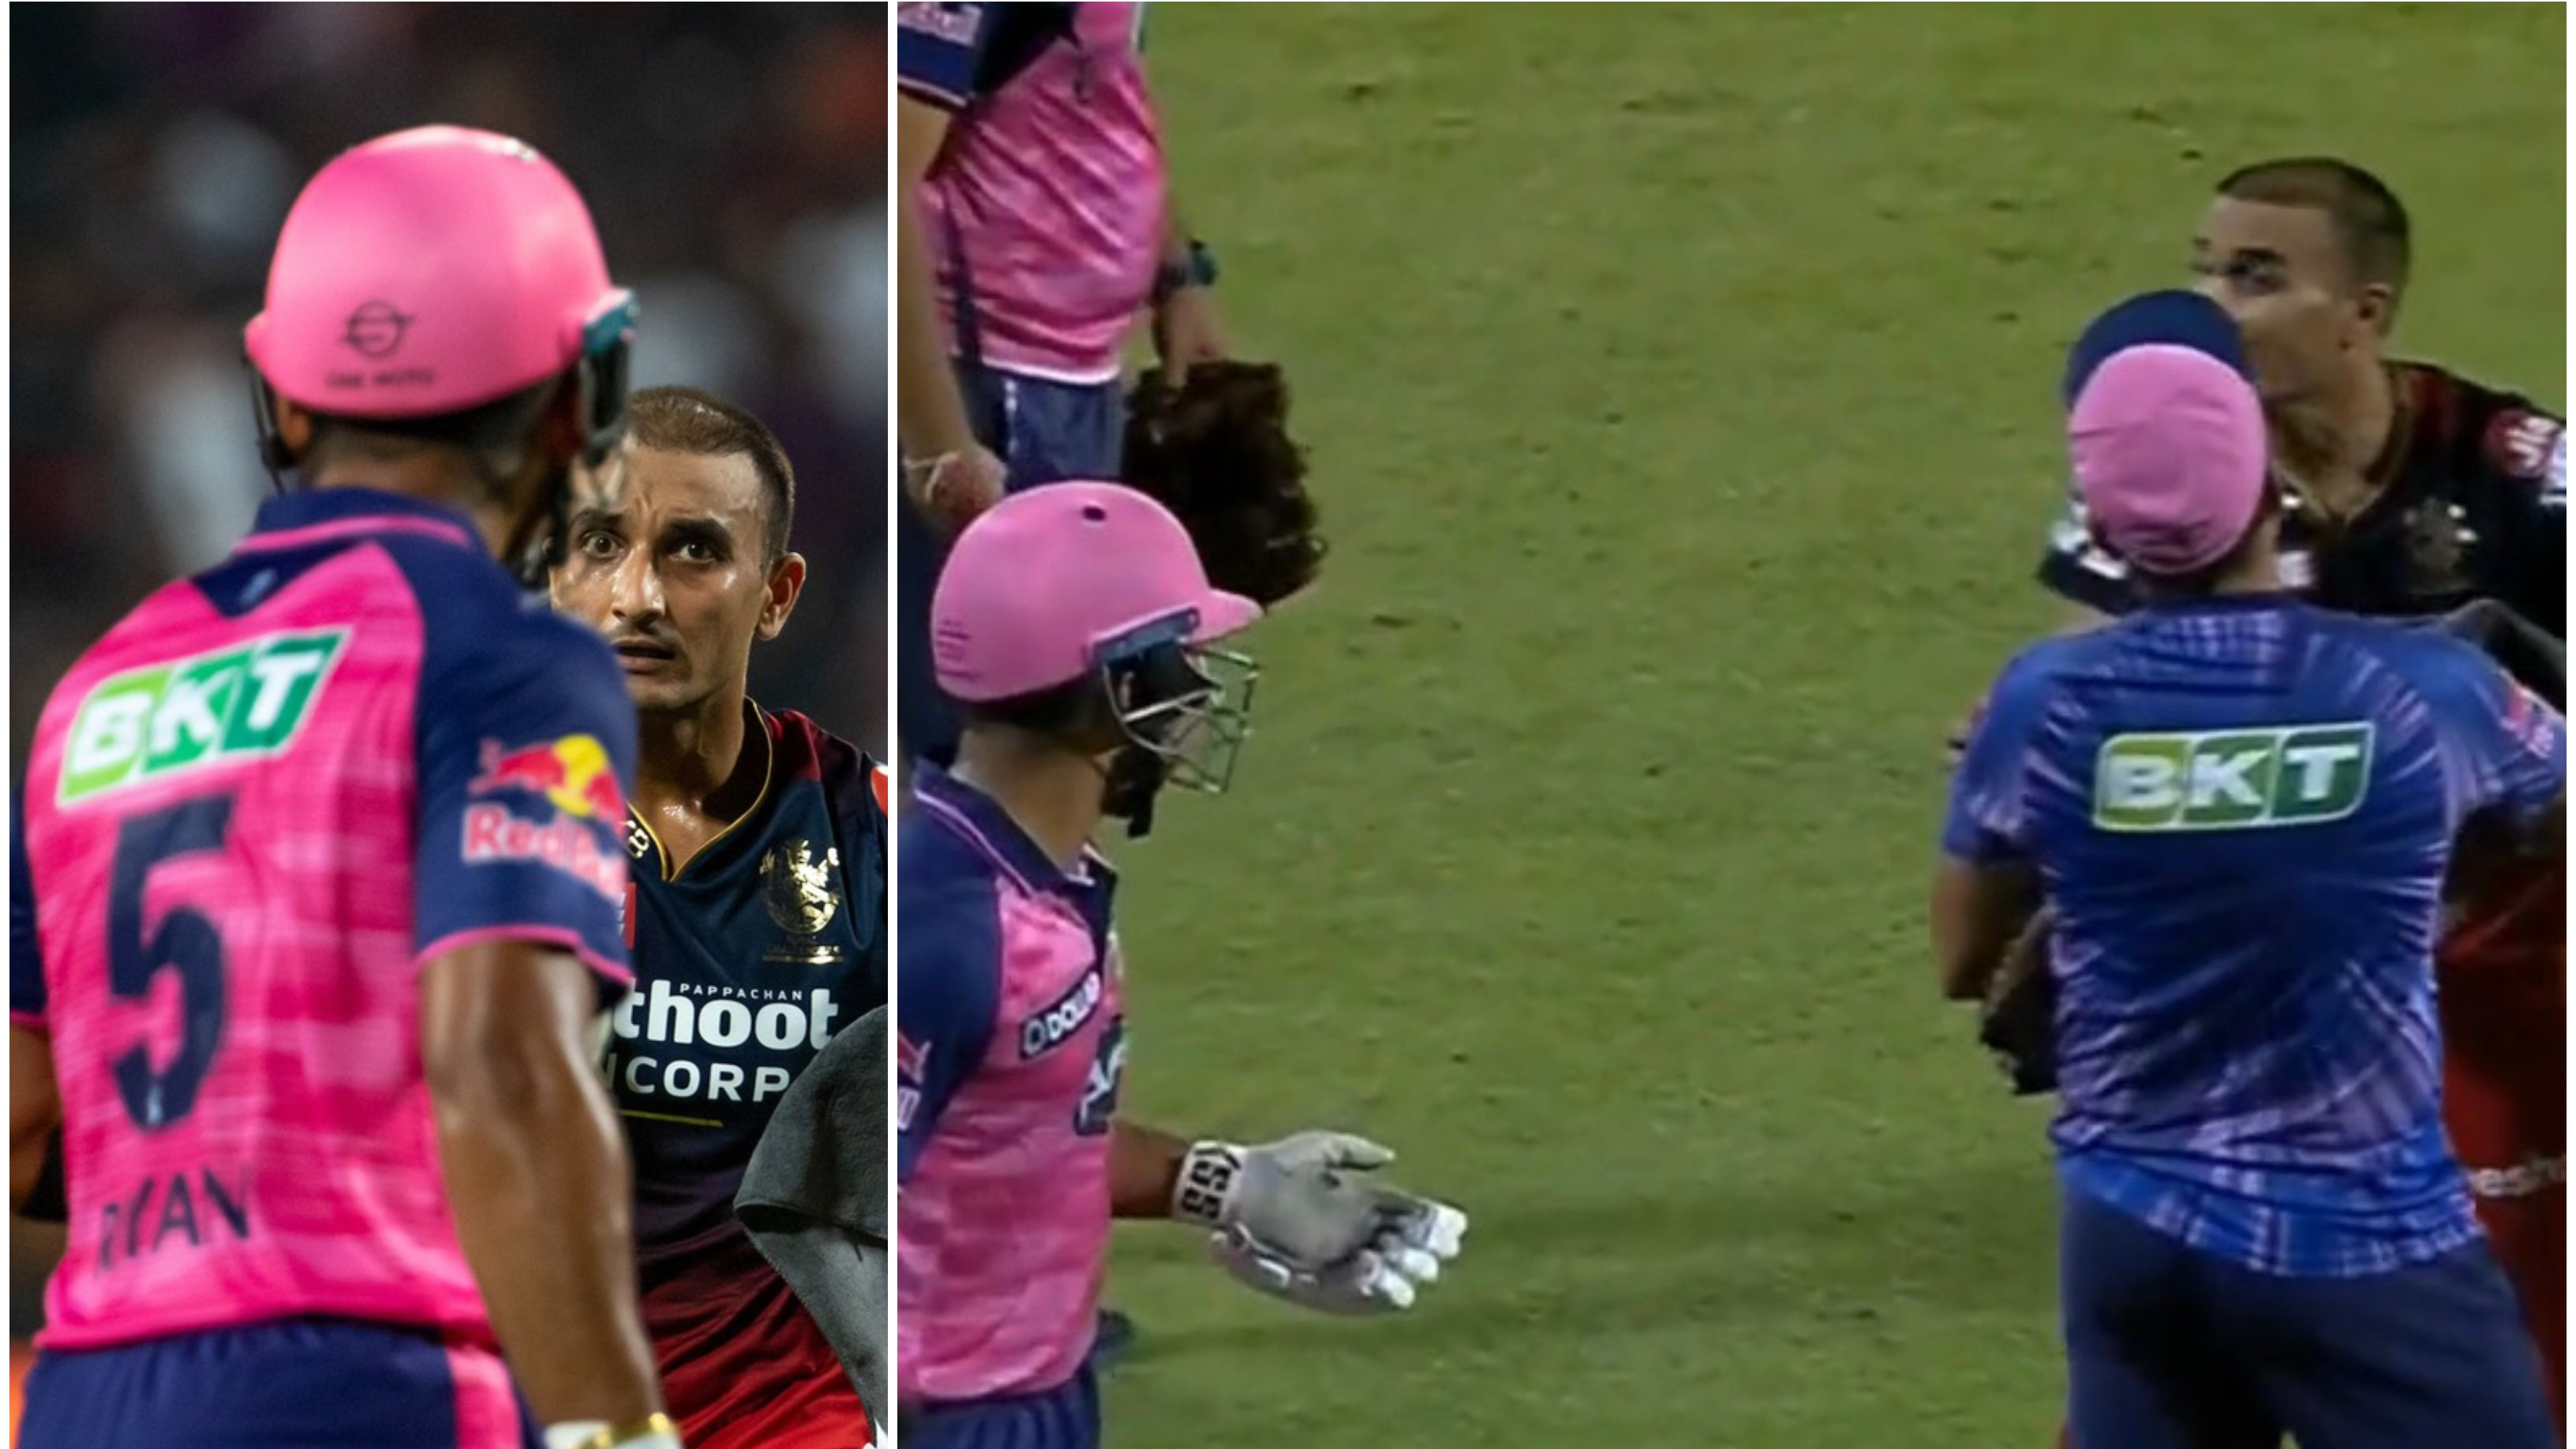 IPL 2022: WATCH – Riyan Parag and Harshal Patel engage in a heated exchange during RCB-RR clash